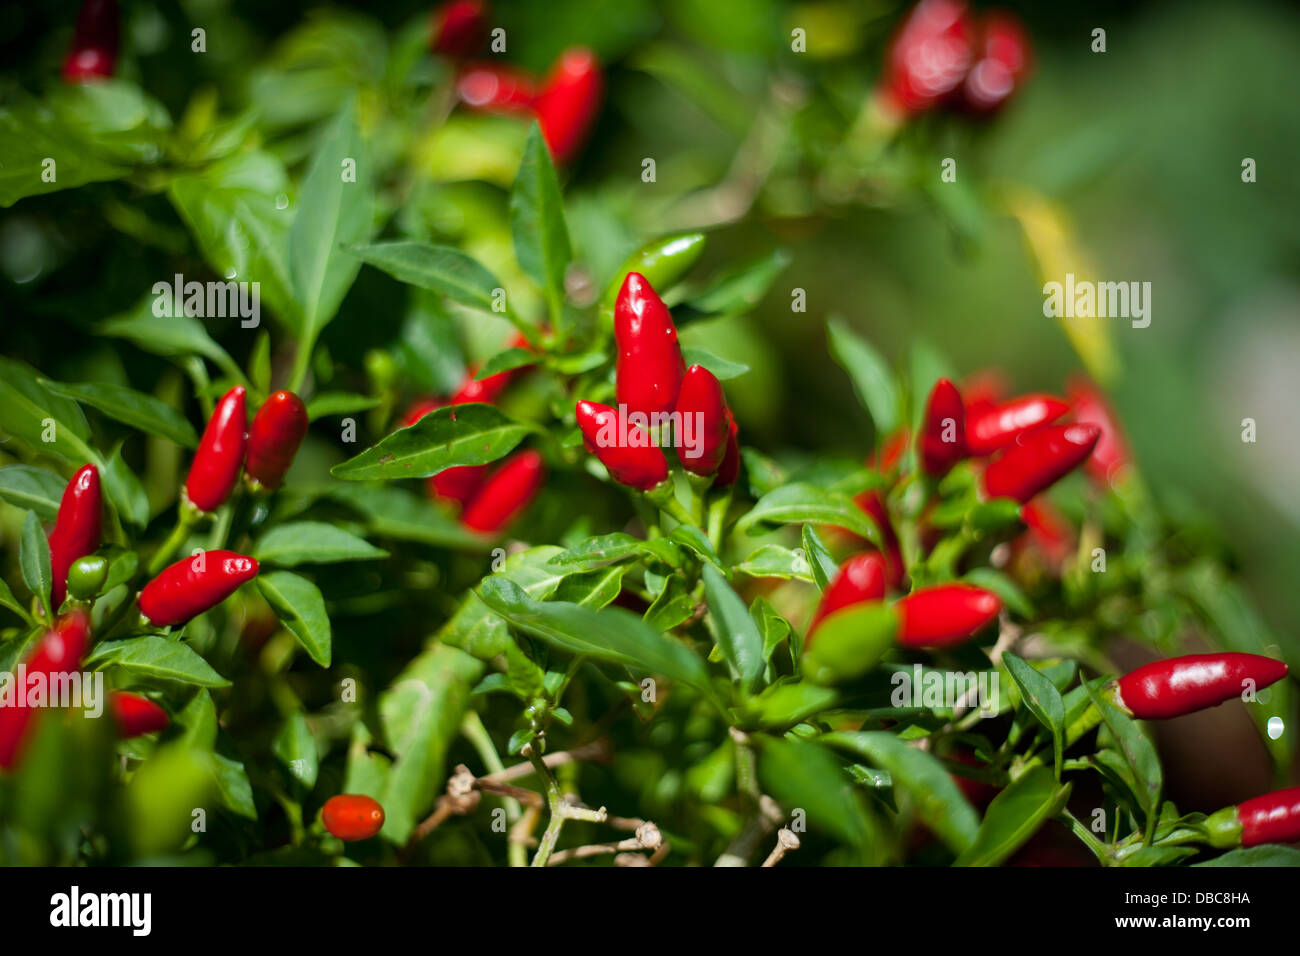 Red hot chili peppers ( Capsicum annuum ) on the plant growing in a green organic vegetable garden in Aitutaki Island, Cook Islands Stock Photo